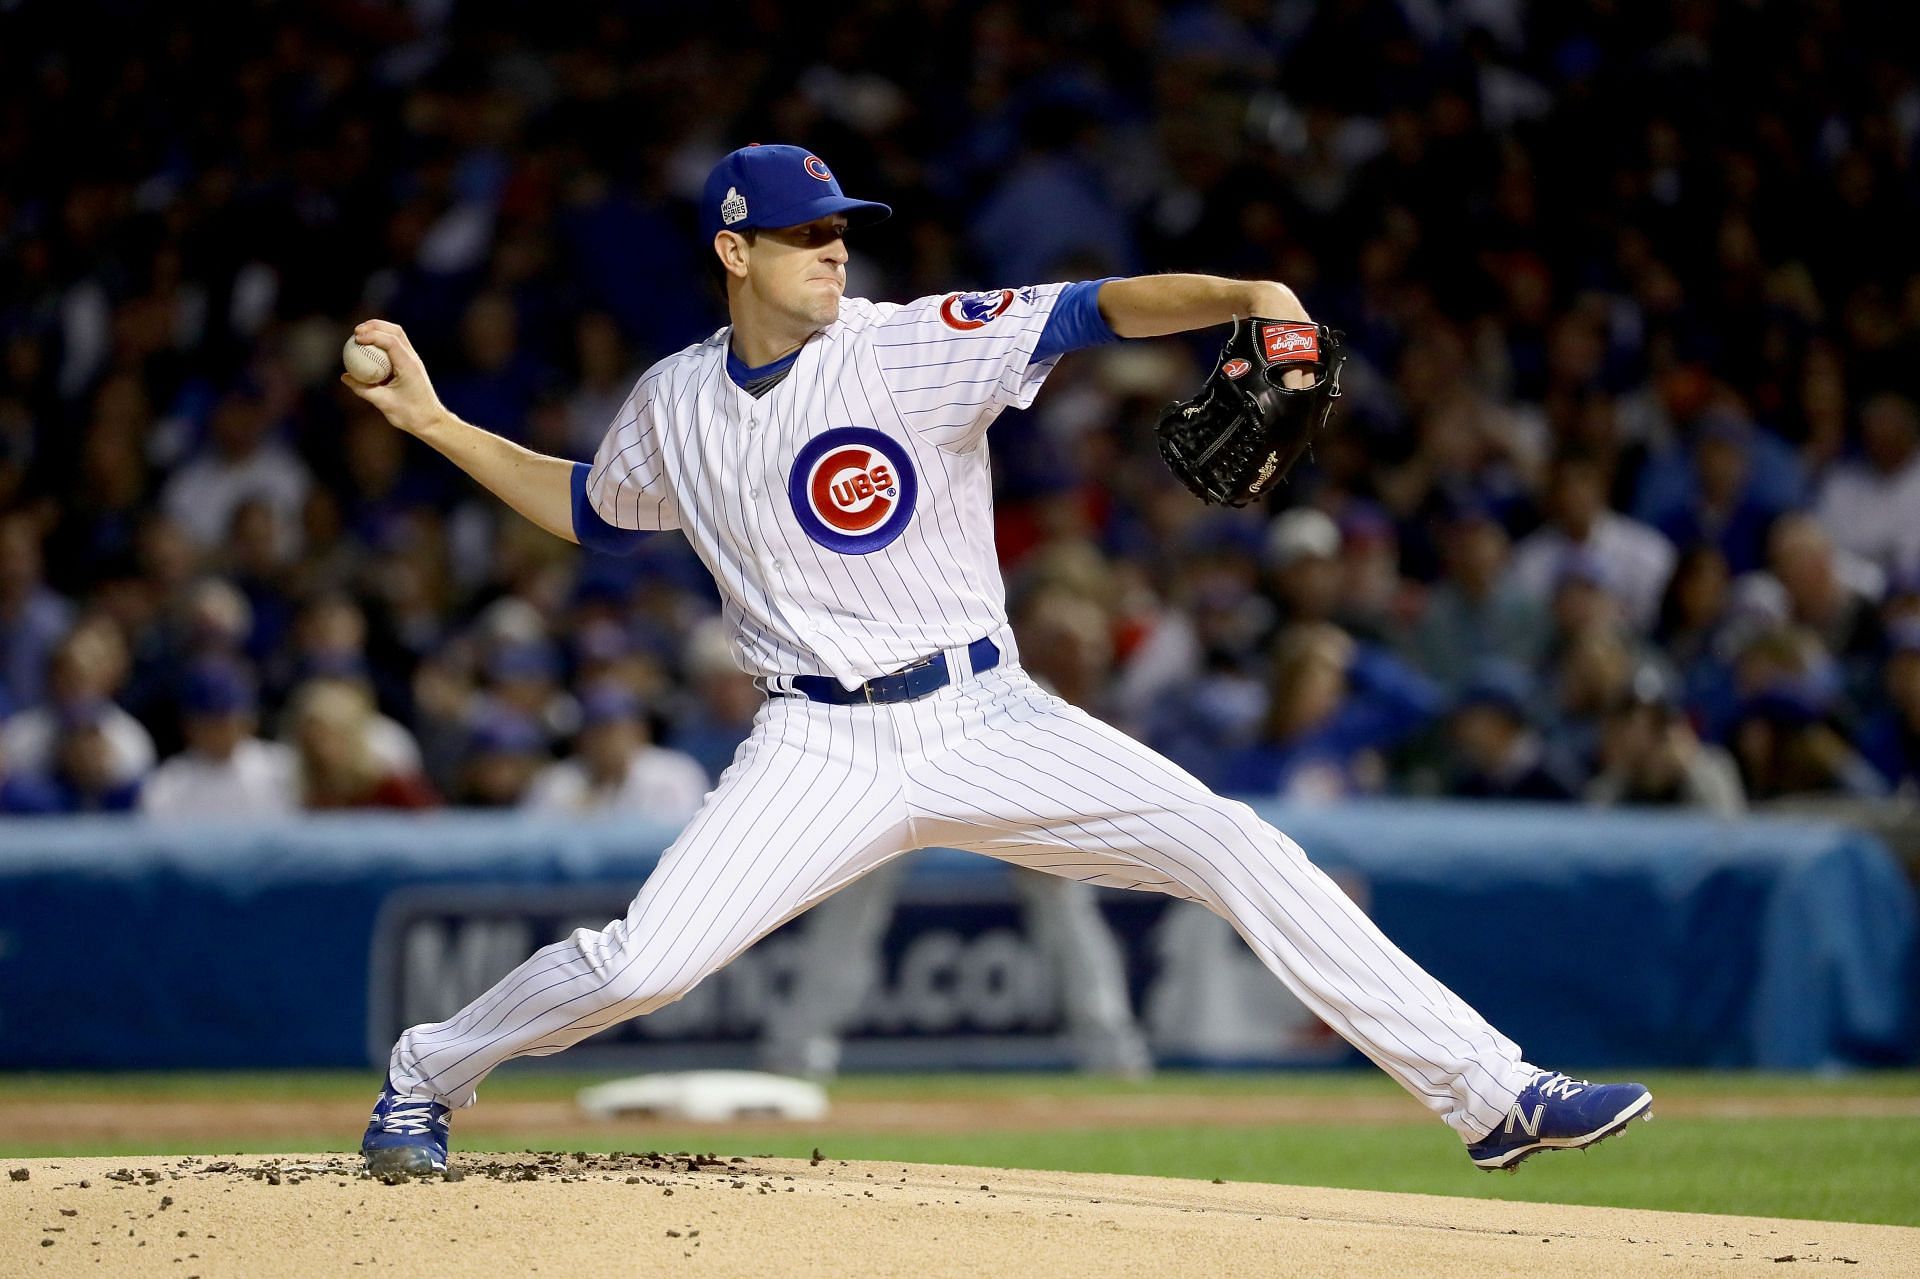 Kyle Hendricks looks to return to form in 2022